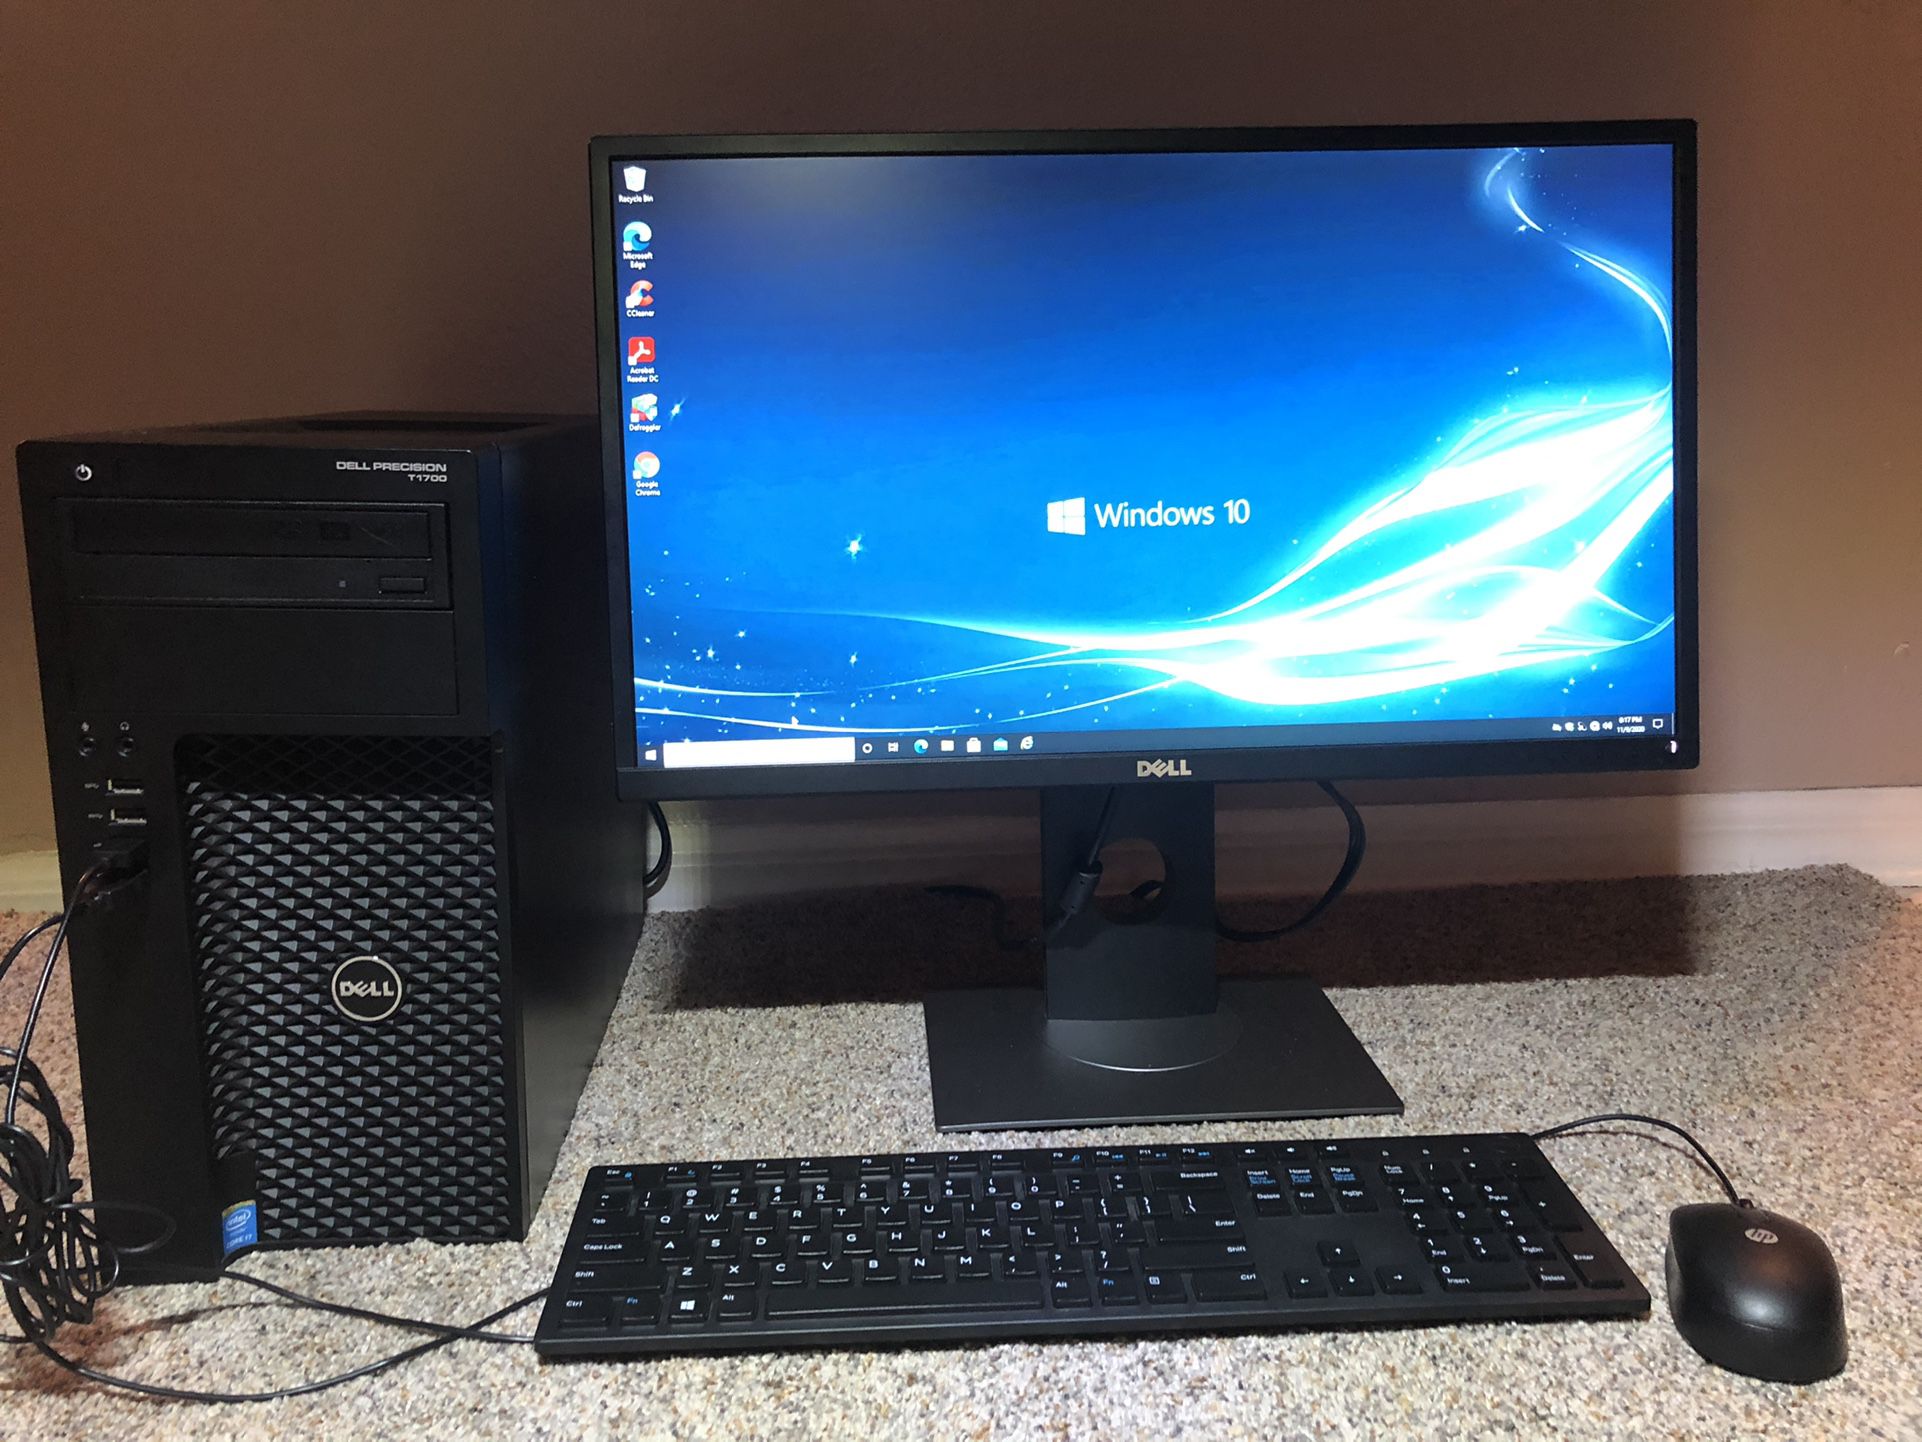 Dell Desktop Computer Win10 Pro - monitor - keyboard - mouse Same OS On Laptops And Tablets